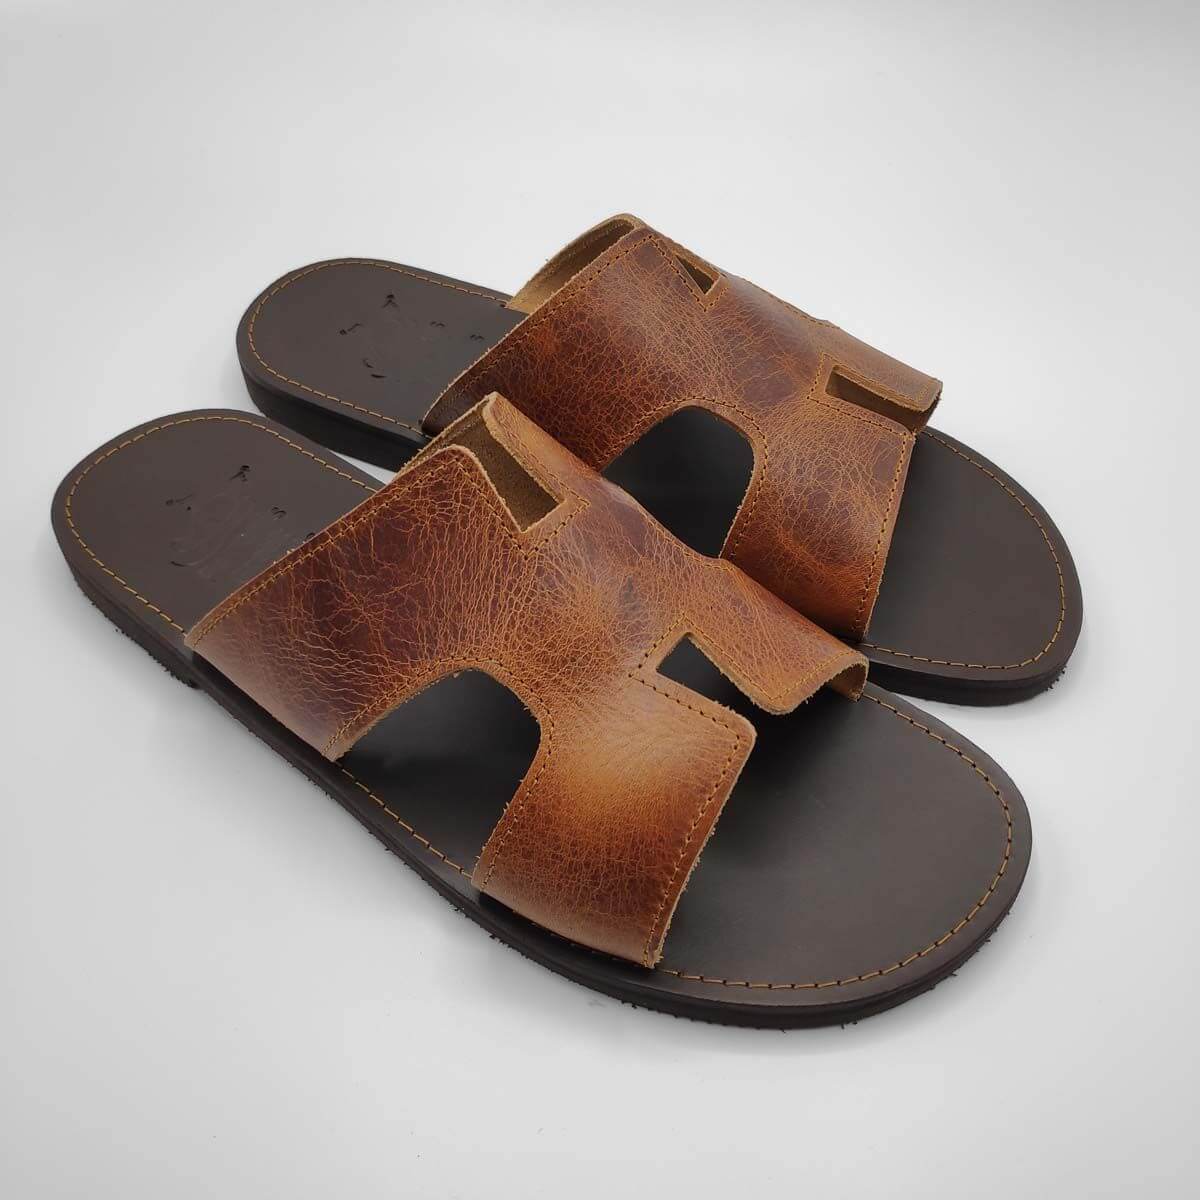 Pam slippers  Mens leather sandals, Leather shoes diy, Leather slippers  for men